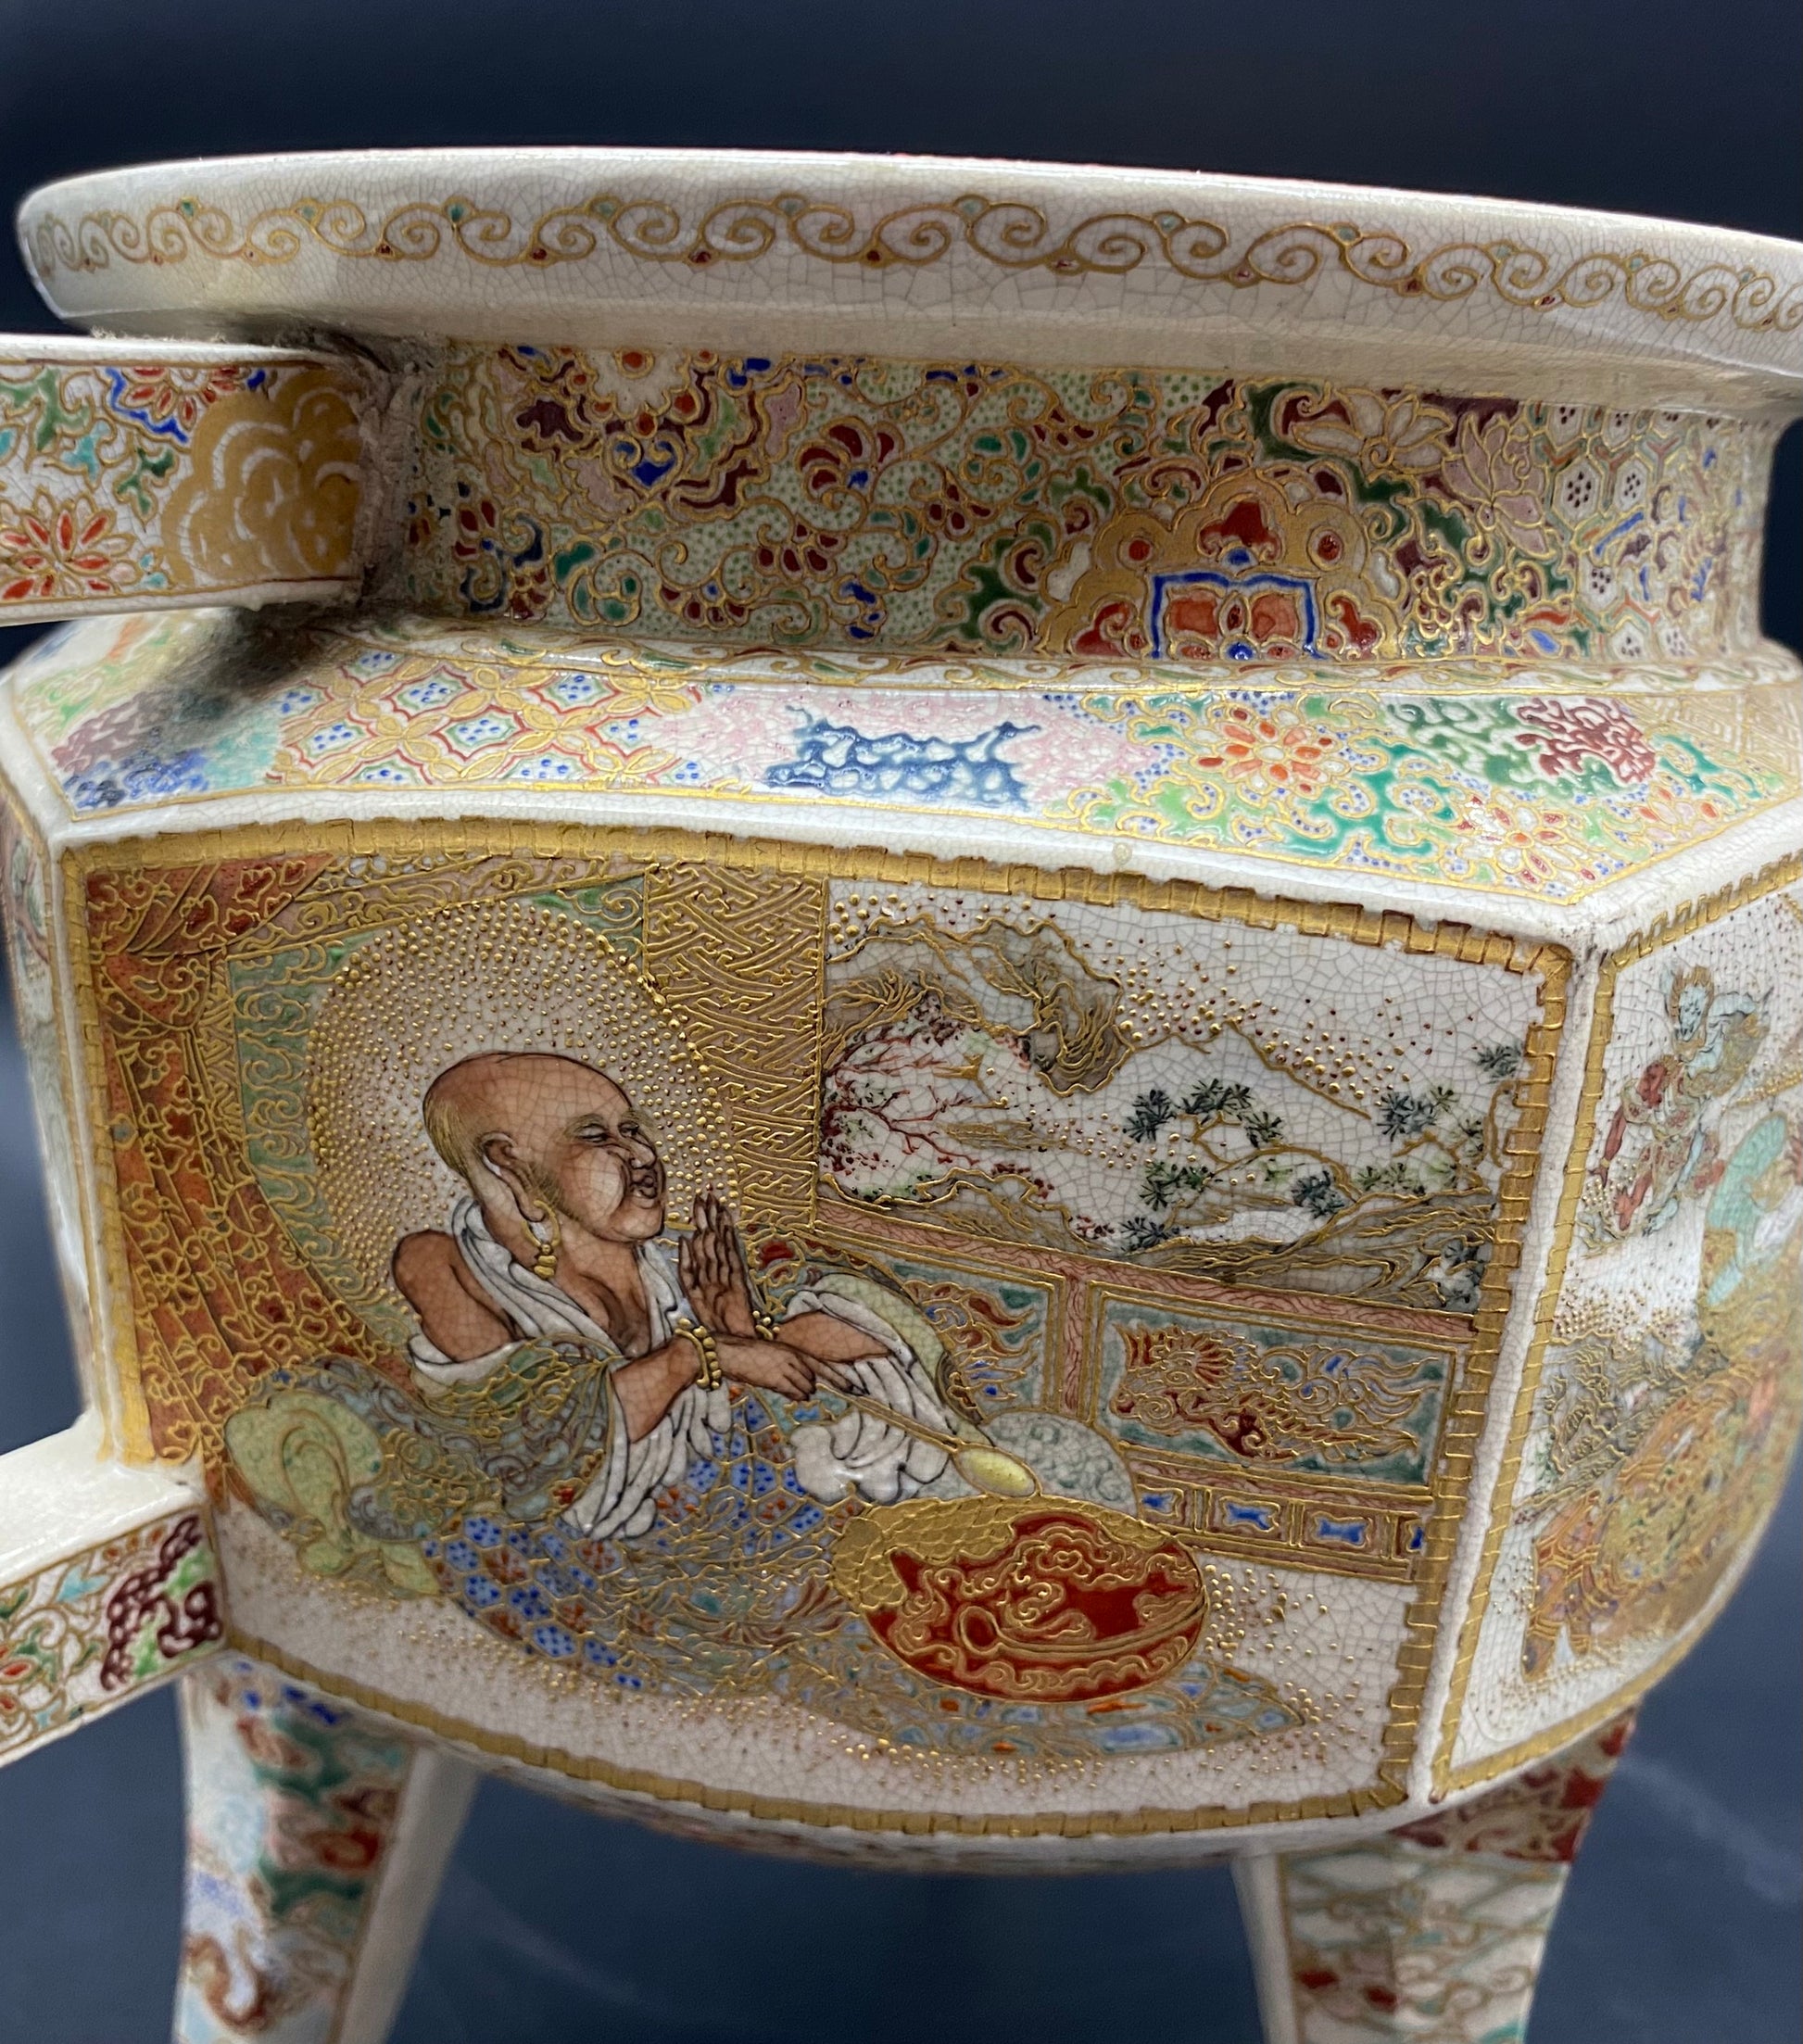 The details of the artwork on this censor is top quality this is an excellent example of Satsuma Pottery.